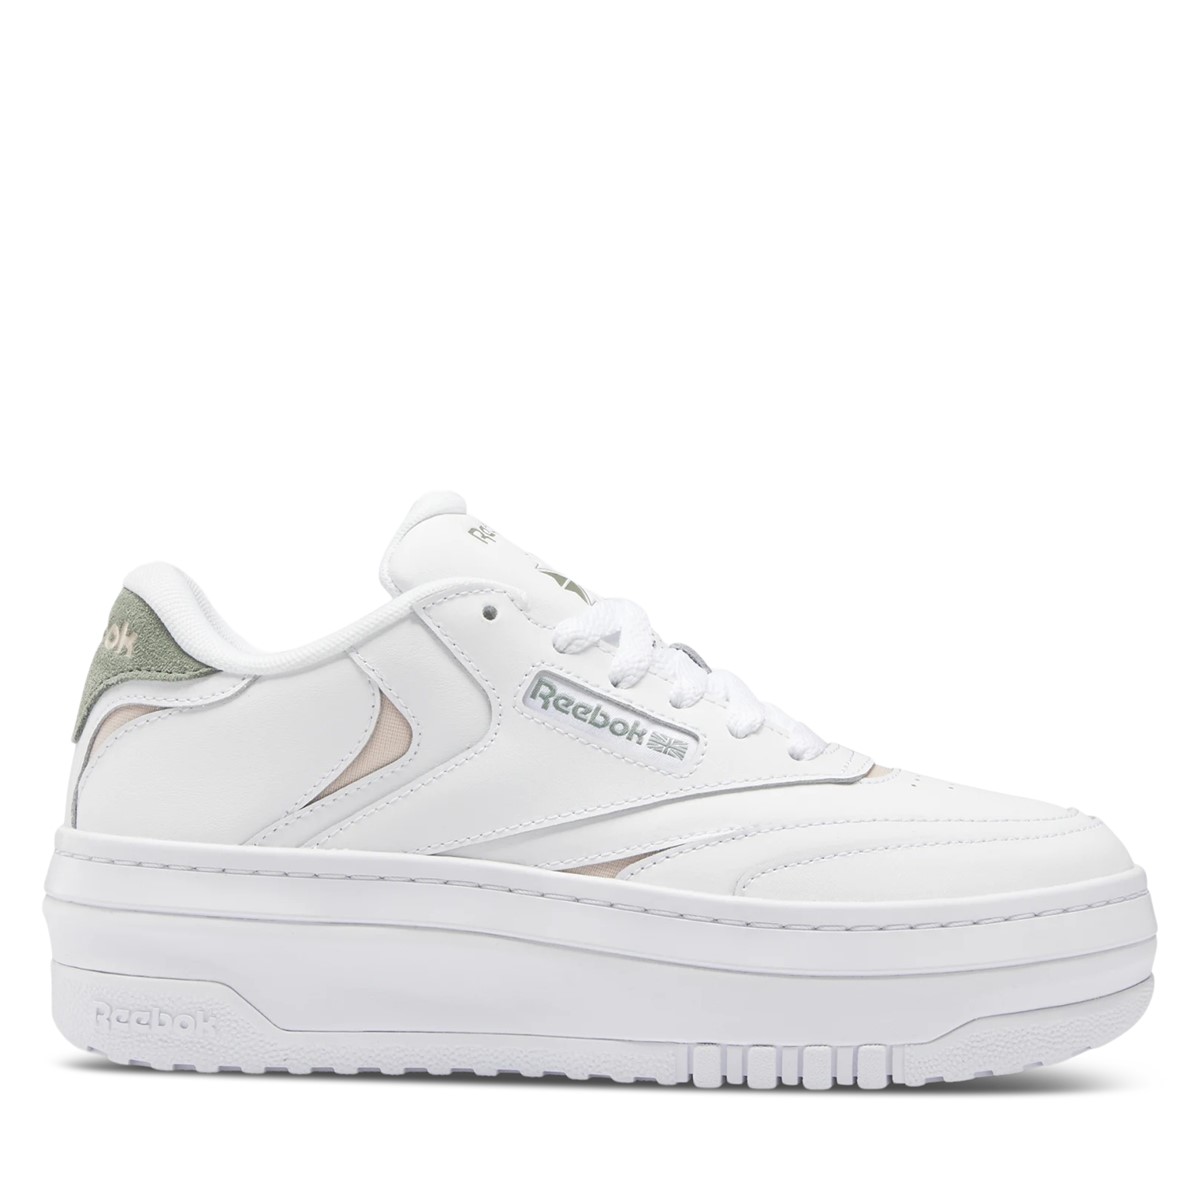 Women's Club C Extra Platform Sneakers in White/Green